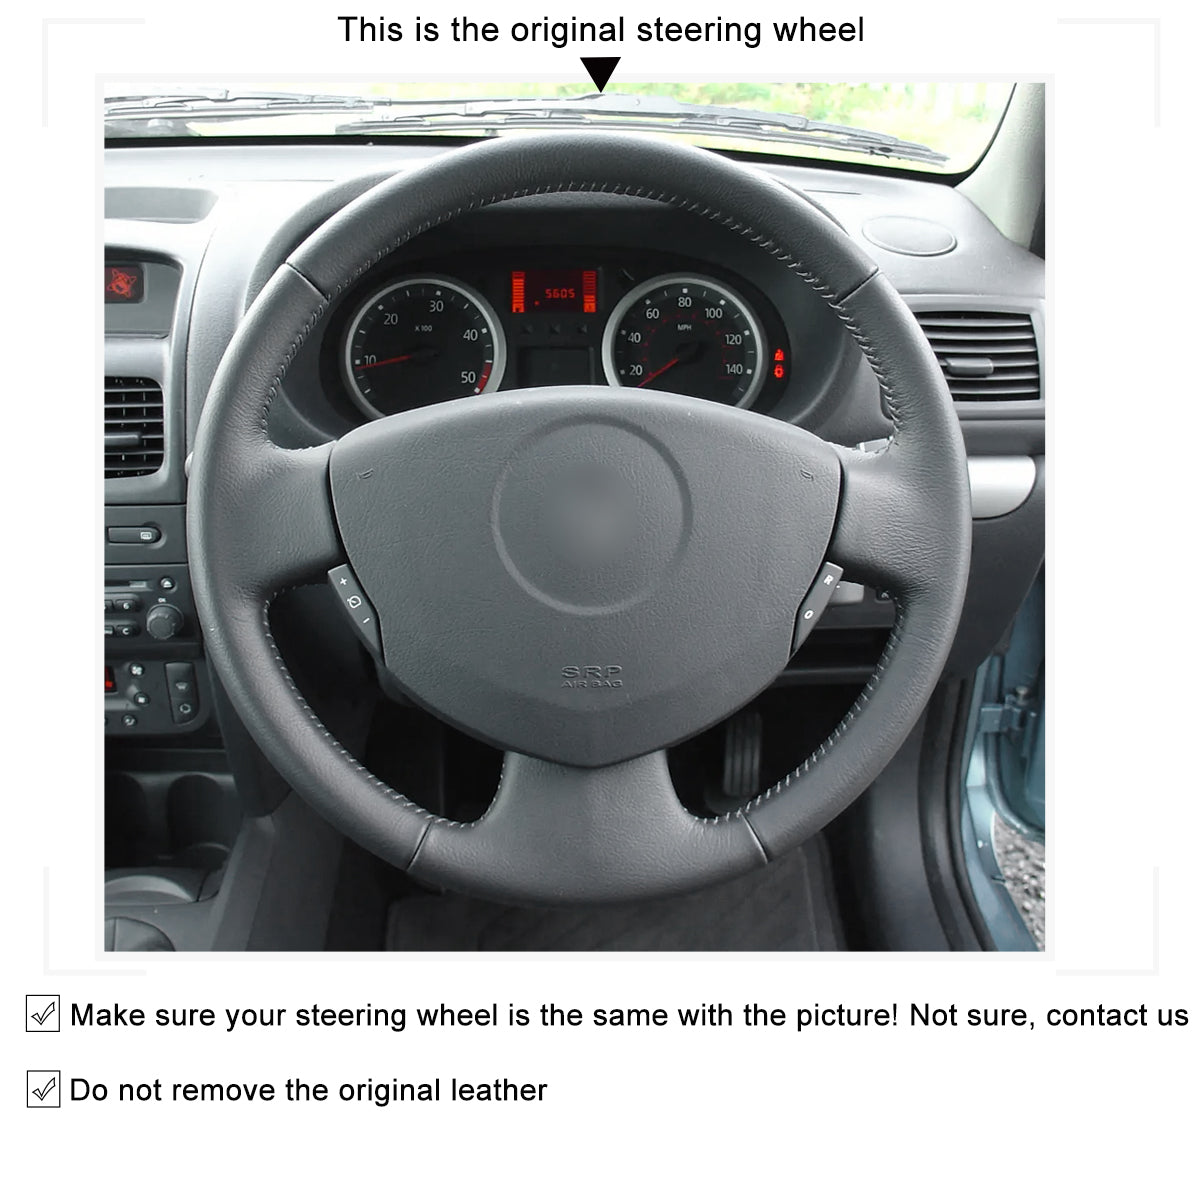 MEWANT Hand Stitch Black Leather Car Steering Wheel Cover for Renault Clio Twingo / for Dacia Sandero